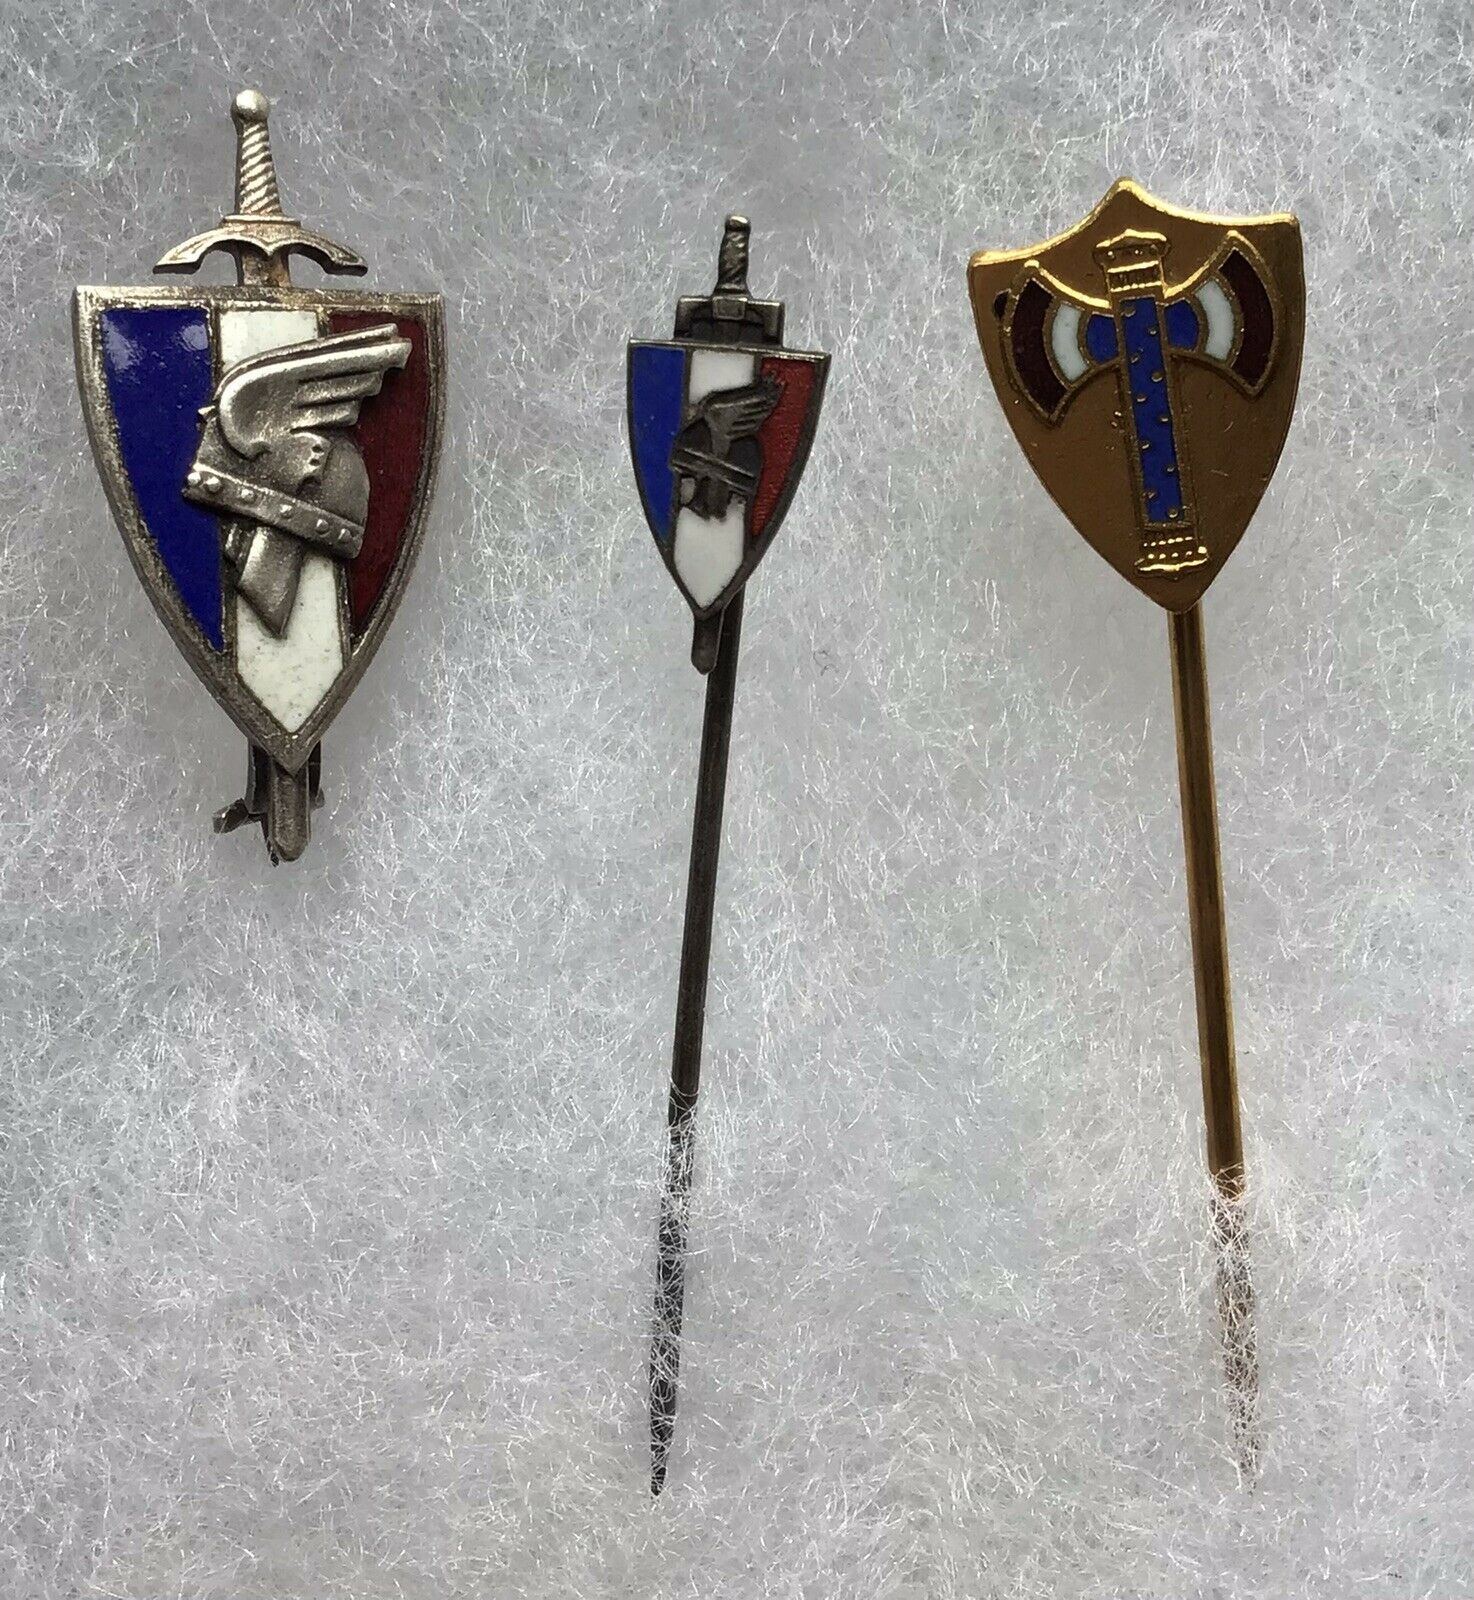 France, Ww2, Vichy Collaborators Lapel Pins, Police, Original, Marked, Lot Of 3